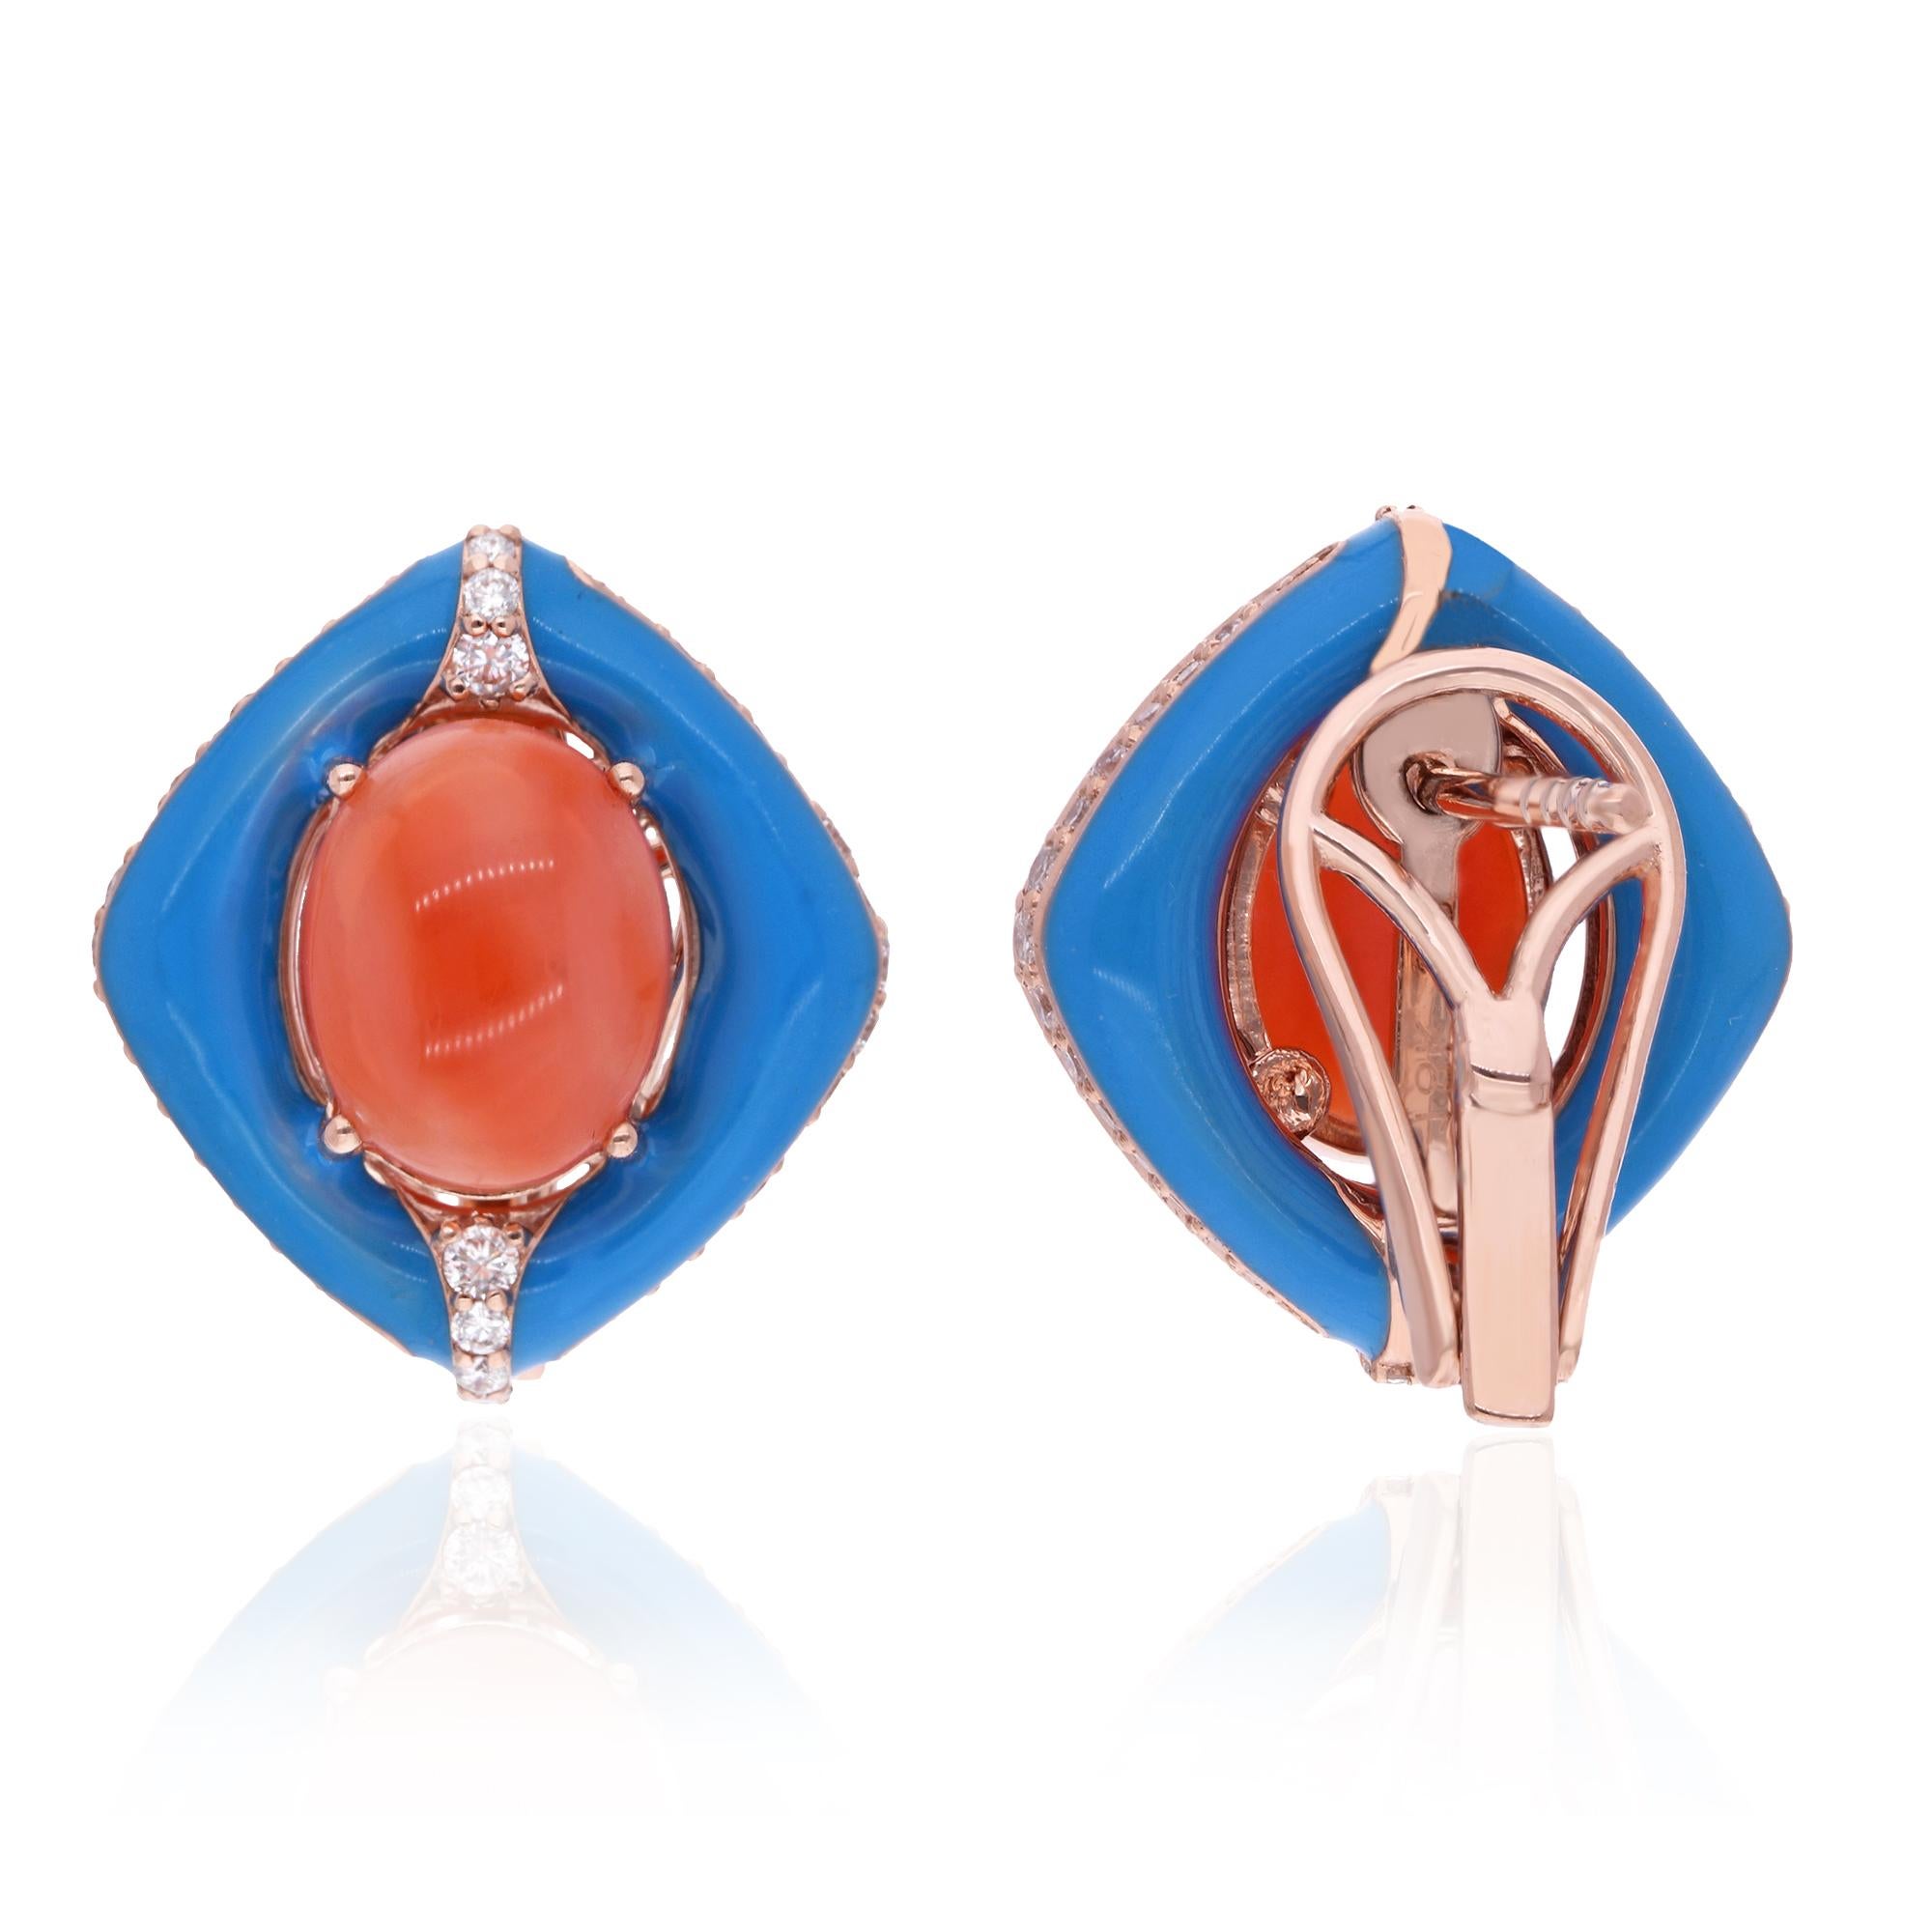 Adorn yourself with the vibrant allure of these Oval Red Coral Gemstone Stud Earrings, set in 14 karat rose gold and accented with enamel detailing and sparkling diamonds. Each earring features a captivating oval-shaped red coral gemstone, renowned